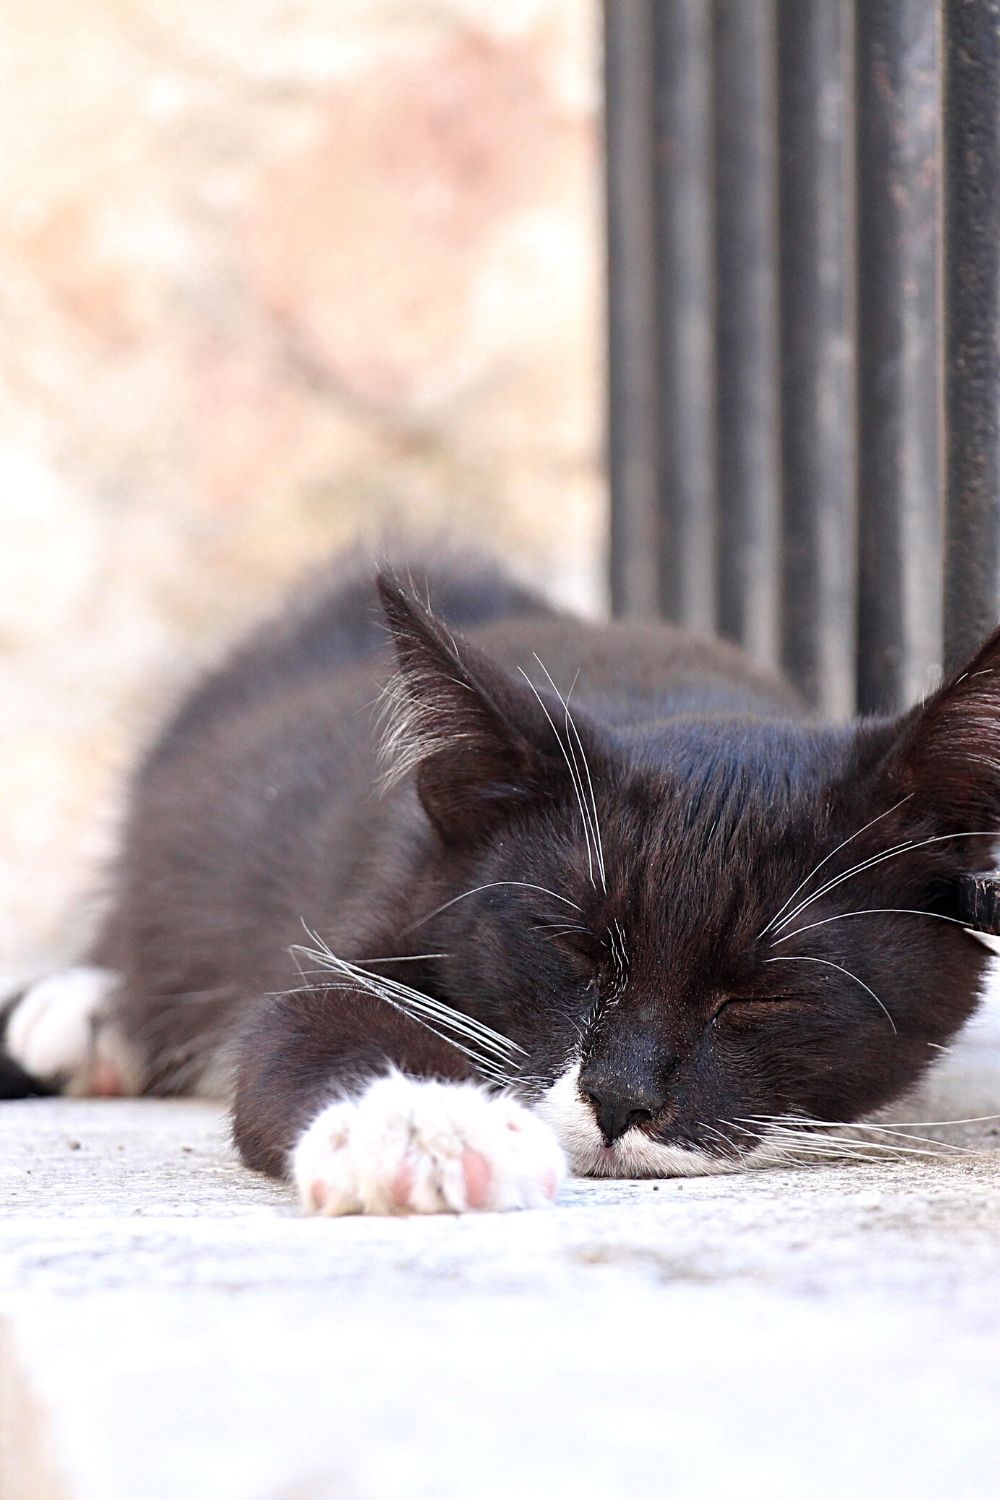 Abandoned or lost cats prefer to sleep on a porch or other shelter where people leave food for them